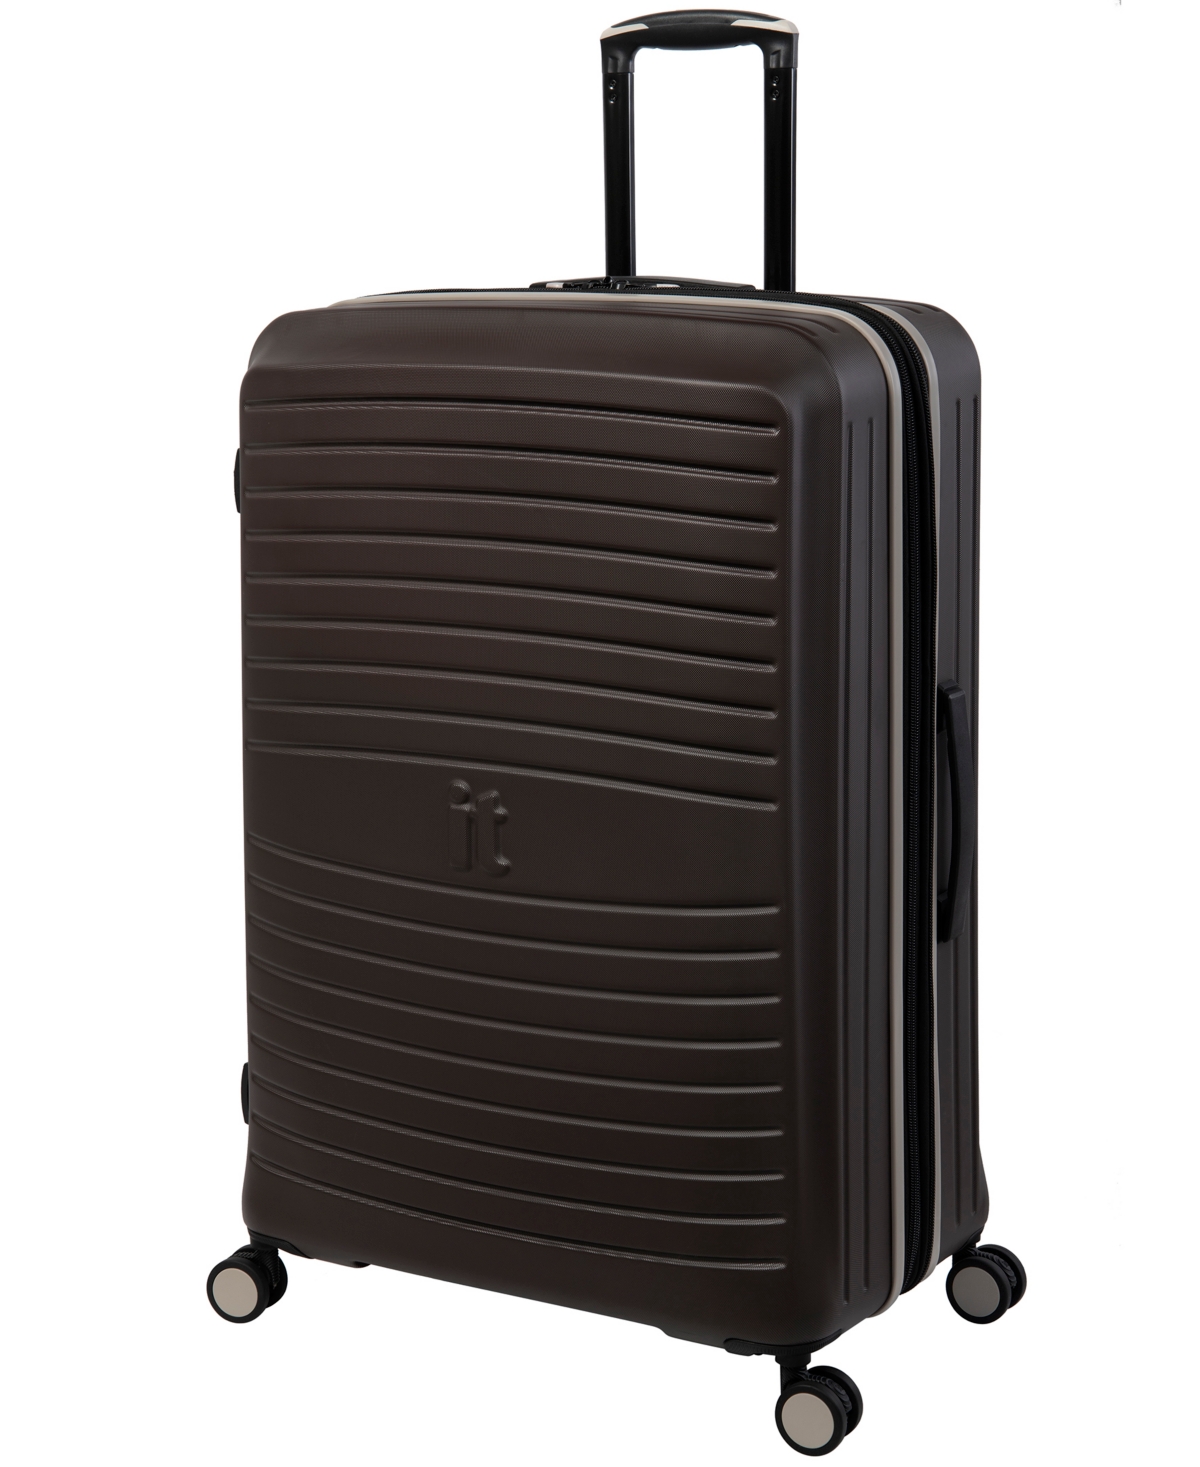 29" Hardside 8-Wheel Expandable Spinner Luggage - Coffee Bean